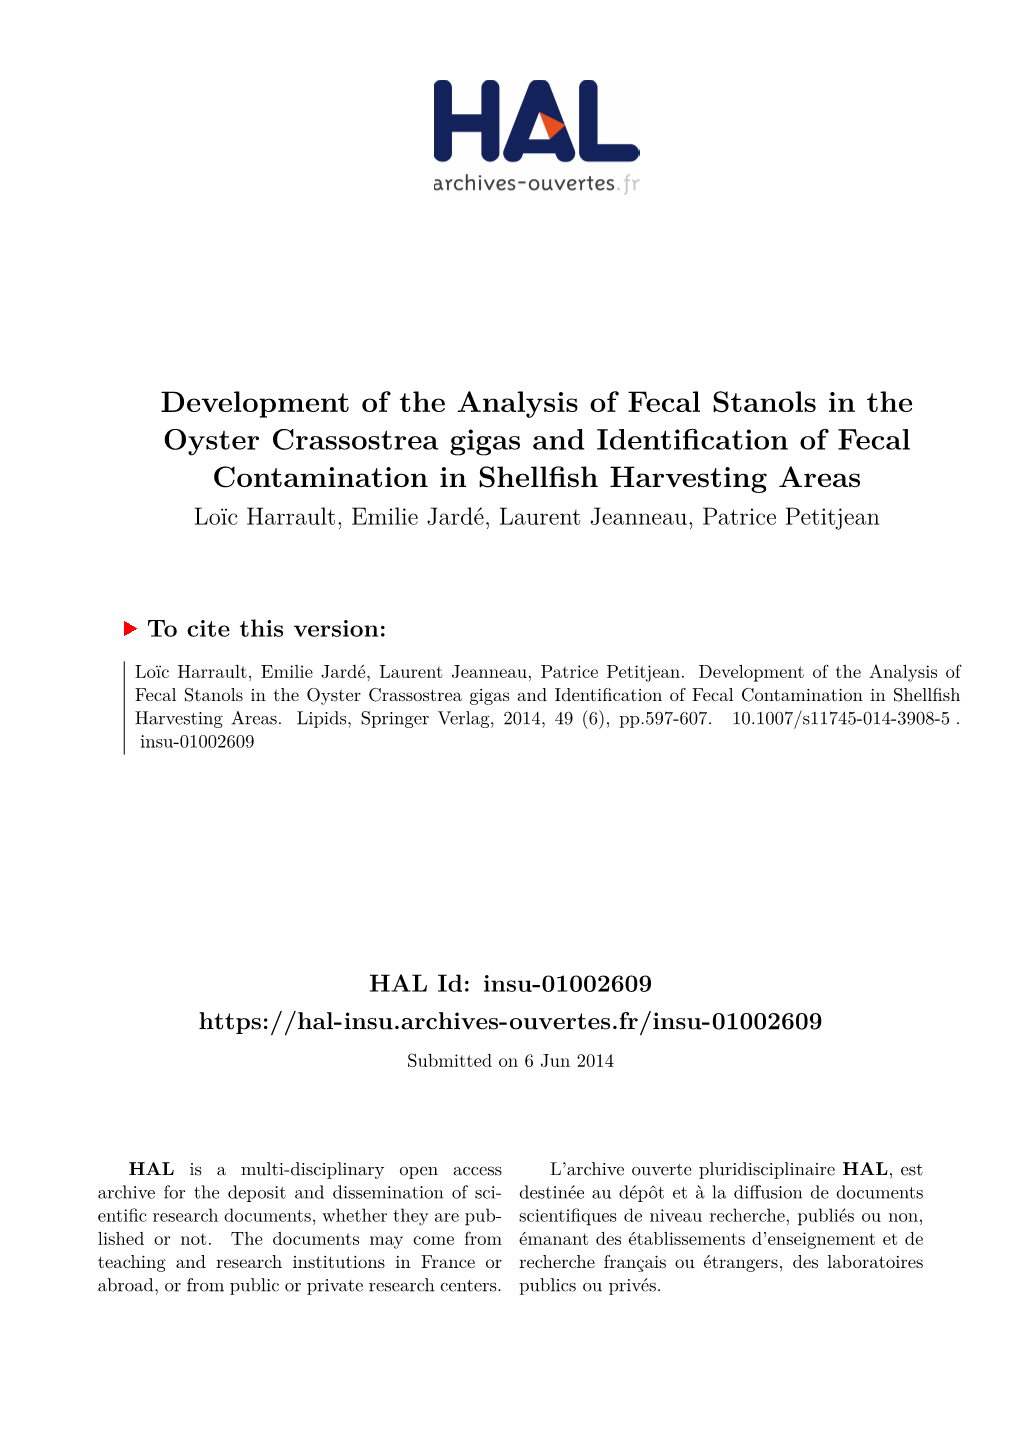 Development of the Analysis of Fecal Stanols in the Oyster Crassostrea Gigas and Identification of Fecal Contamination in Shellf